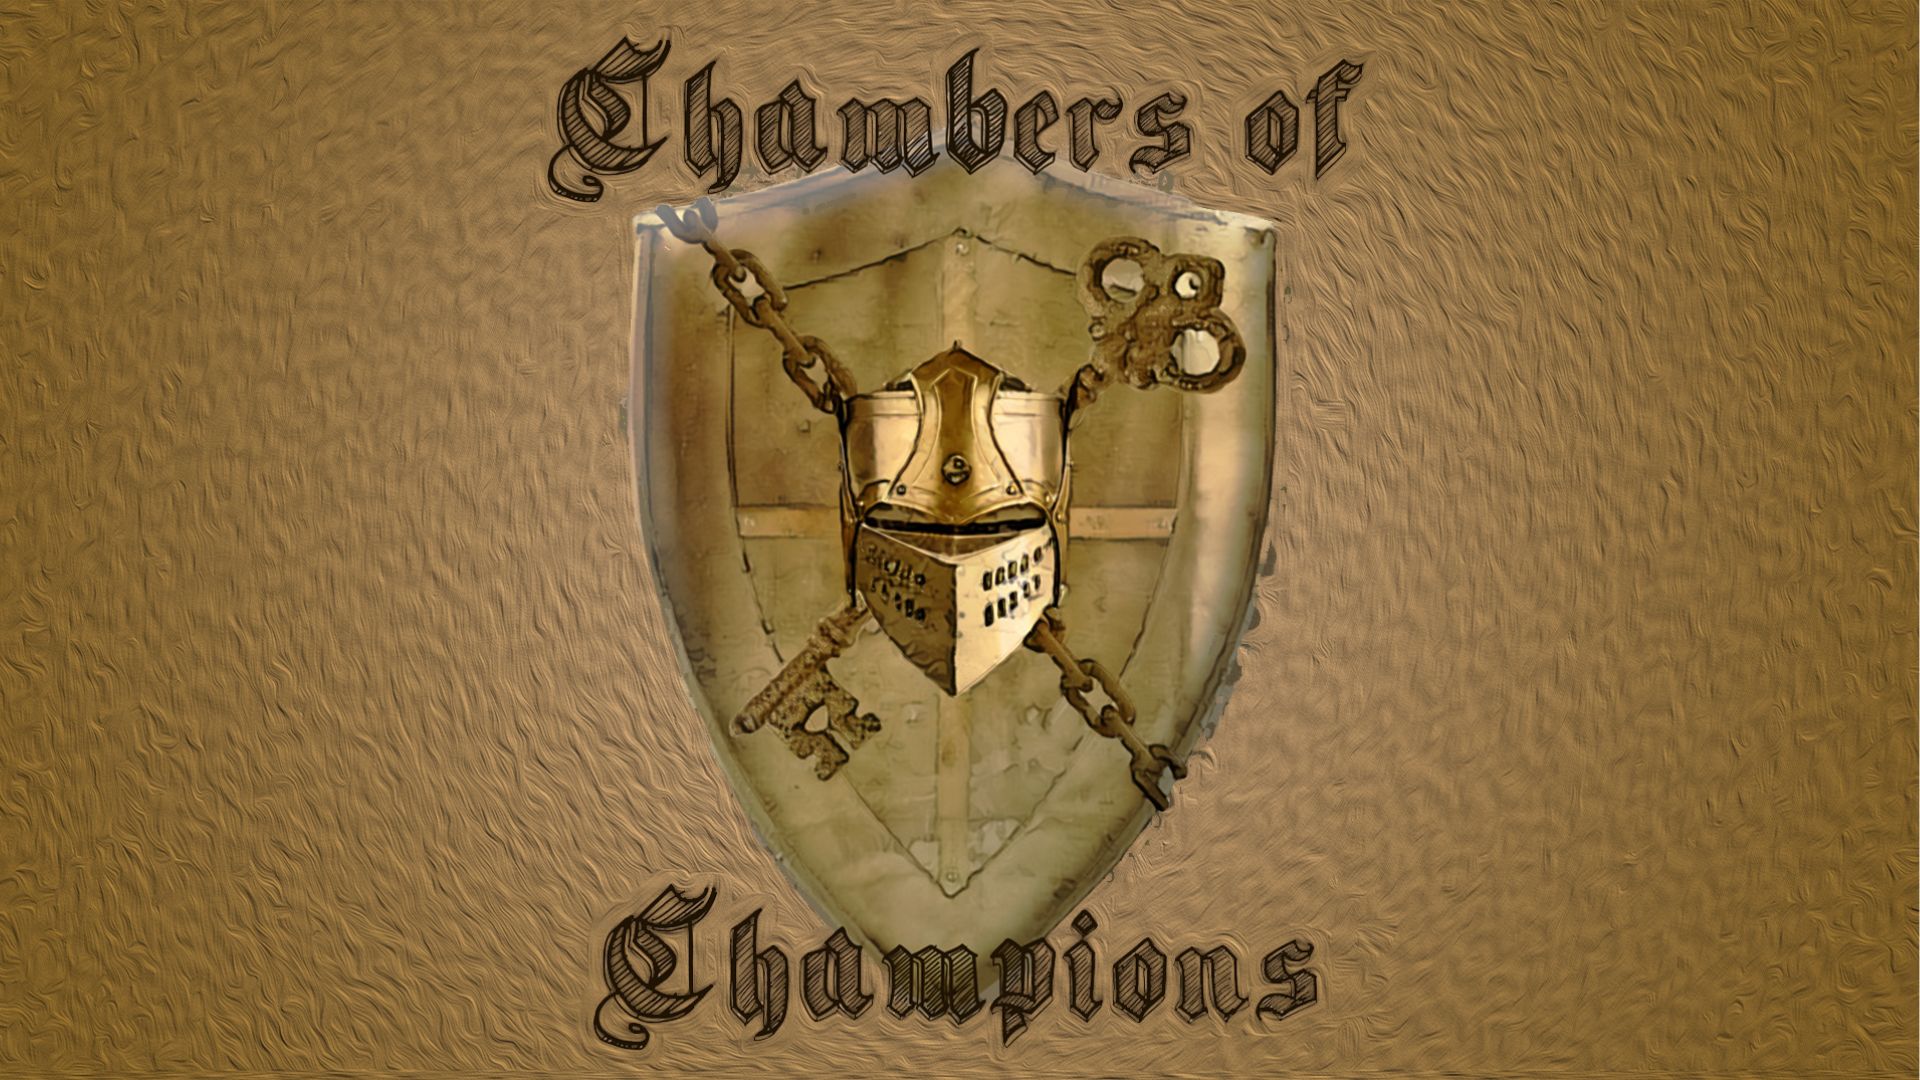 5 persons - Chambers of Champions